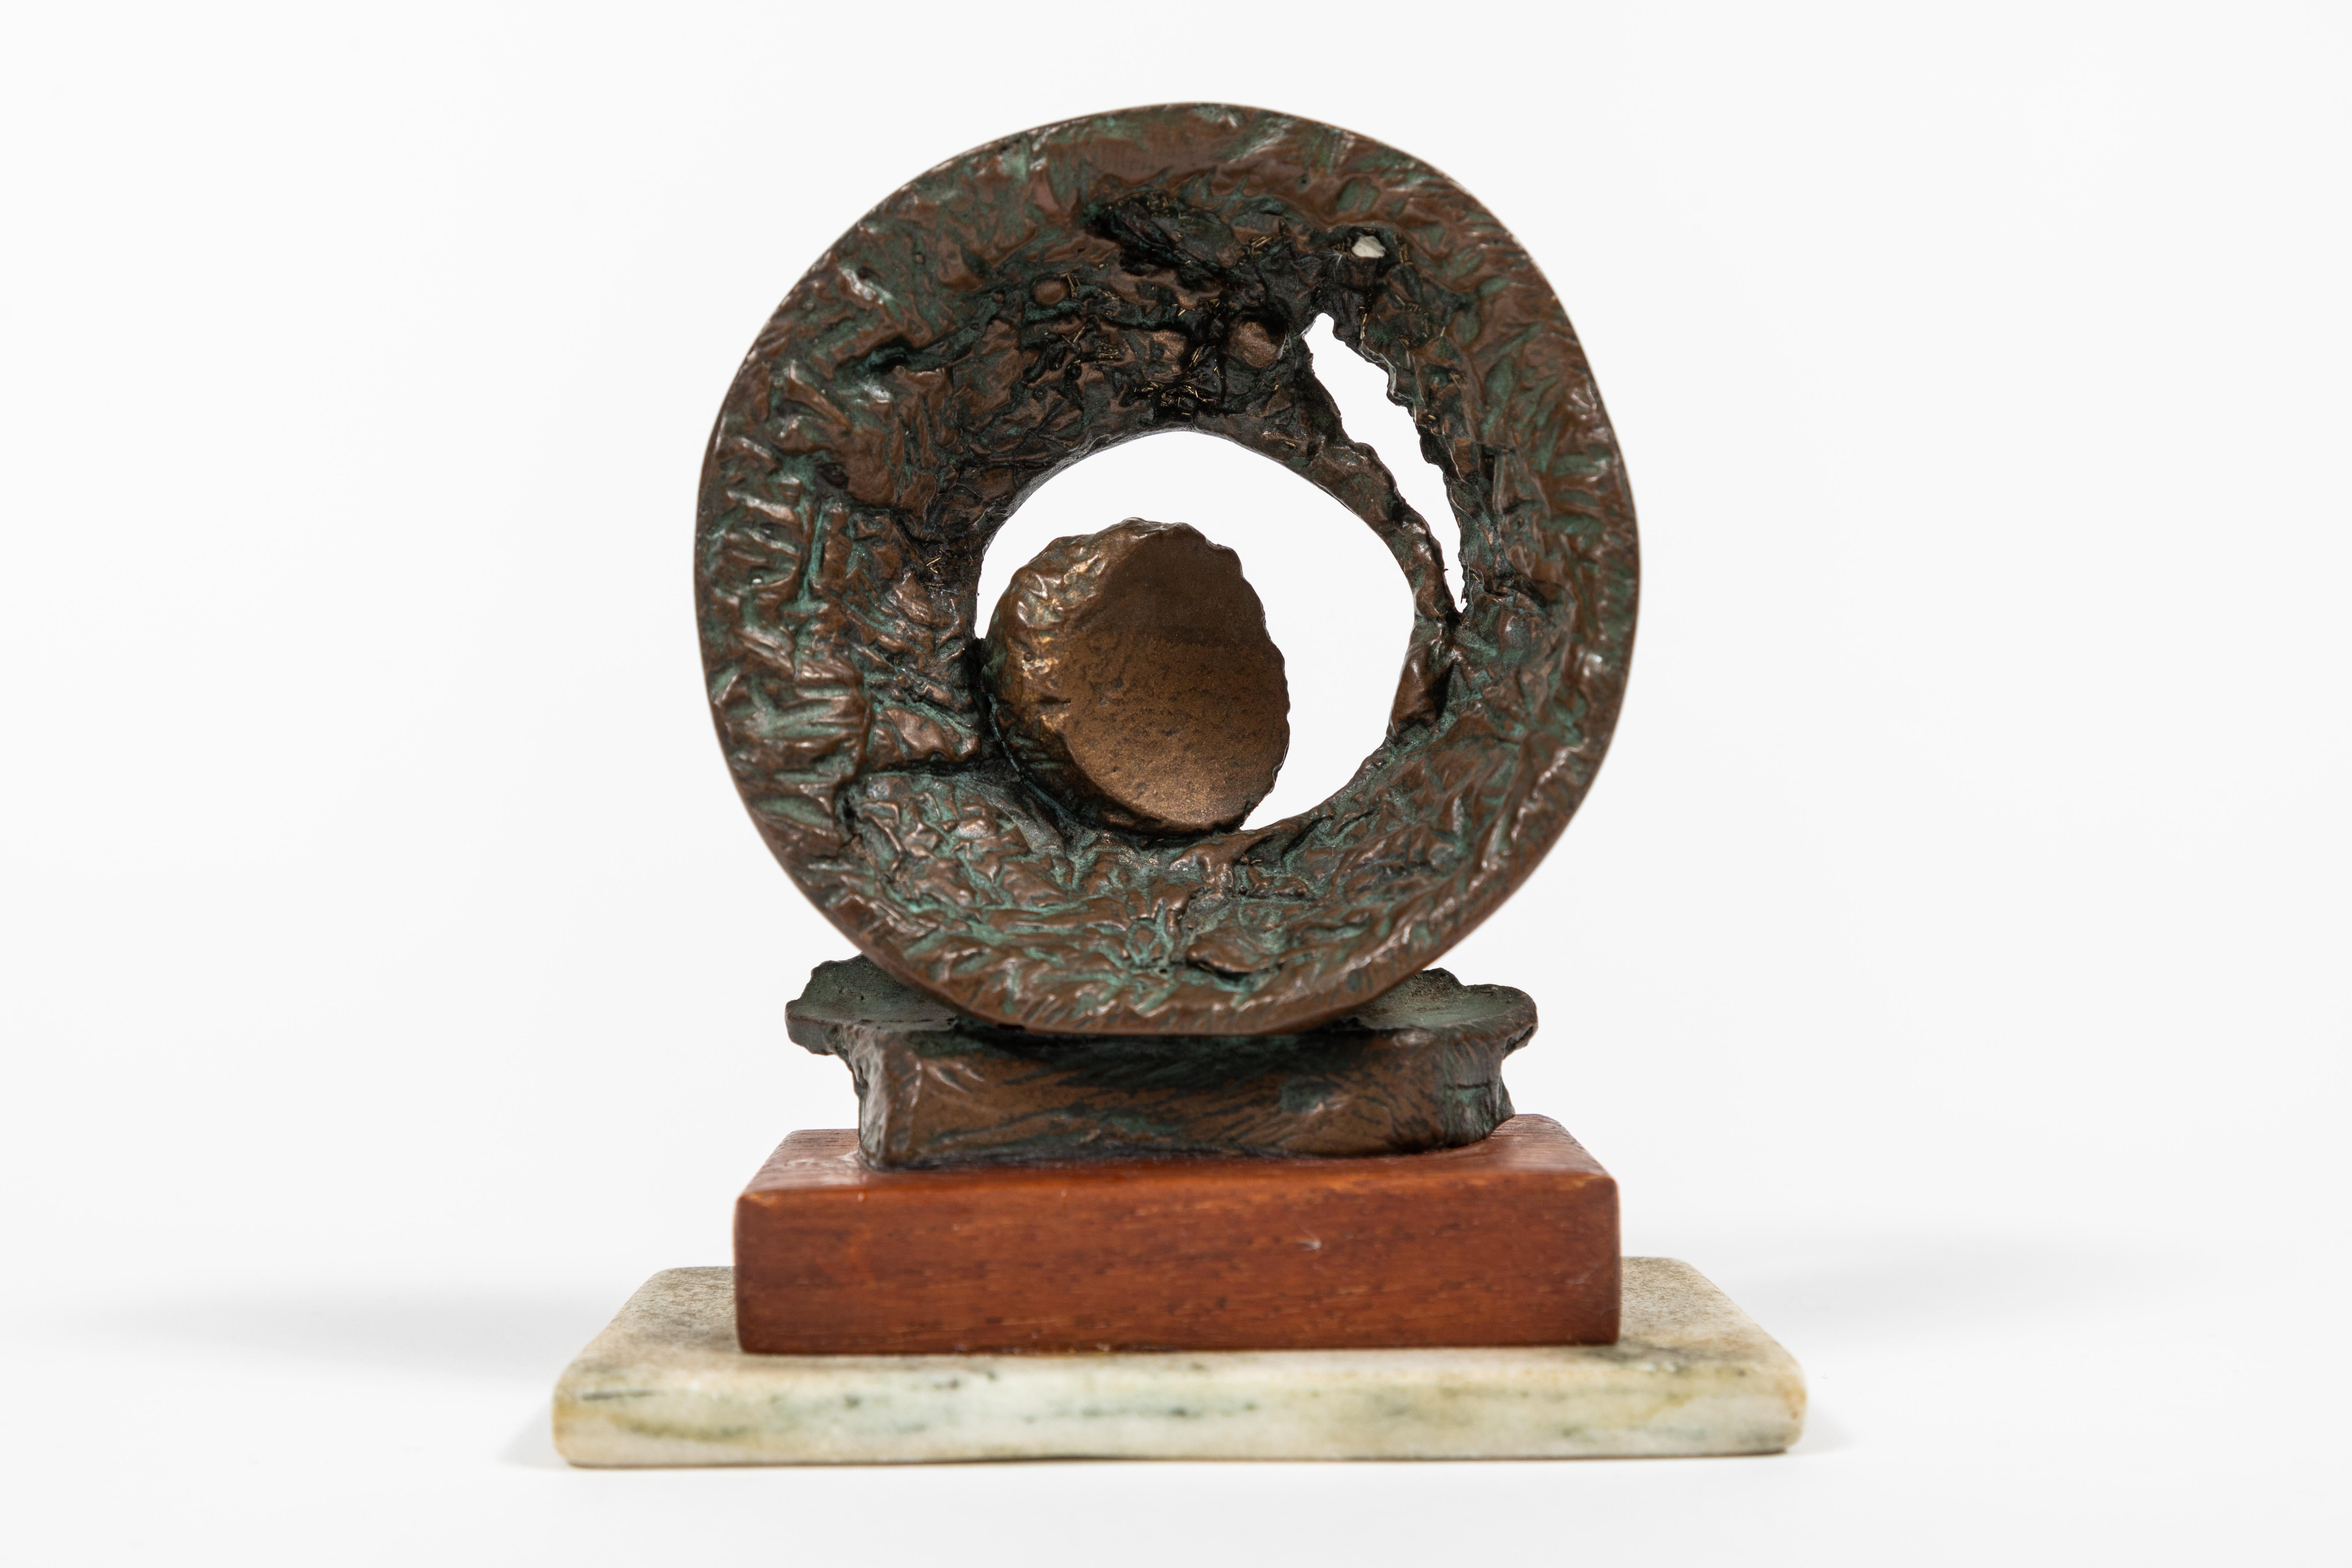 Small vintage circular abstract bronze sculpture with a touch of a verdigris patina and set on a wood and marble base.